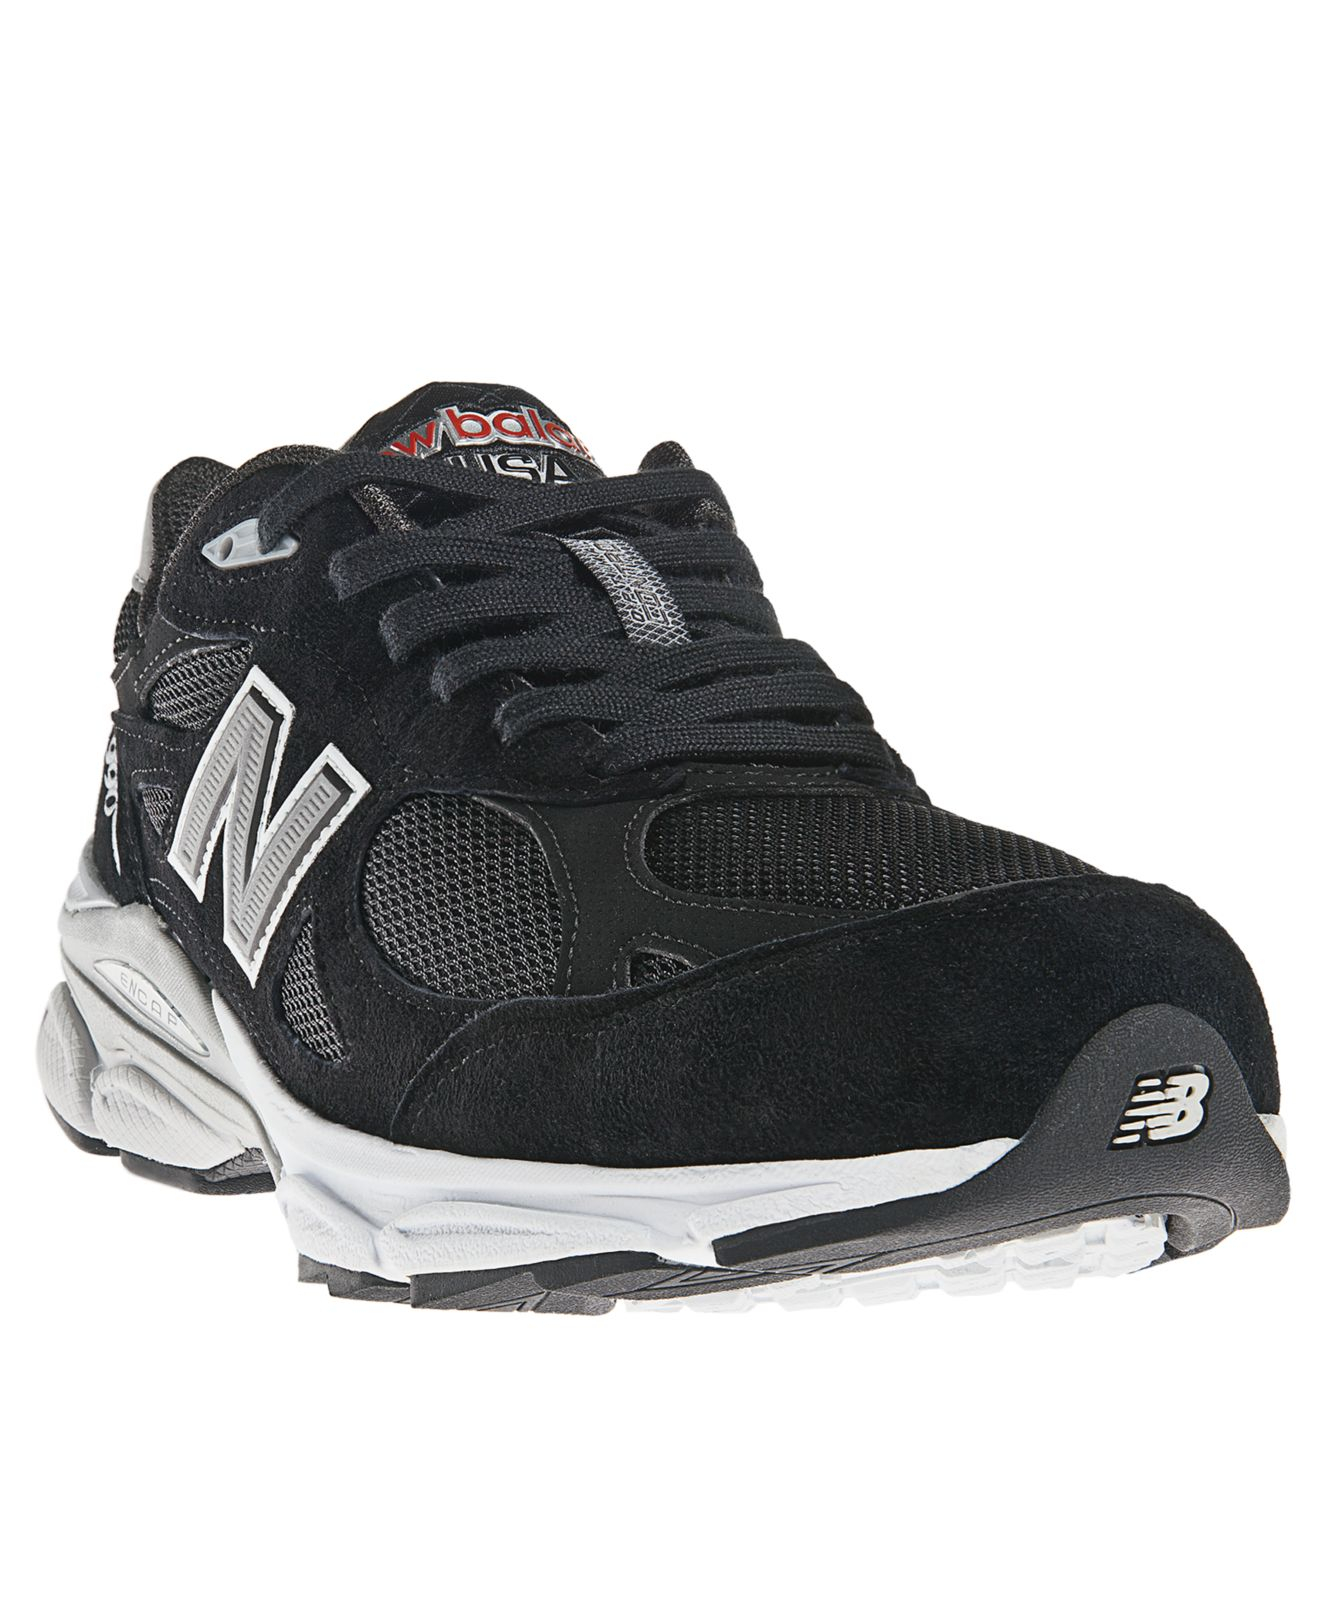 Lyst - New Balance Men's 990 Running Shoes From Finish Line in Black ...